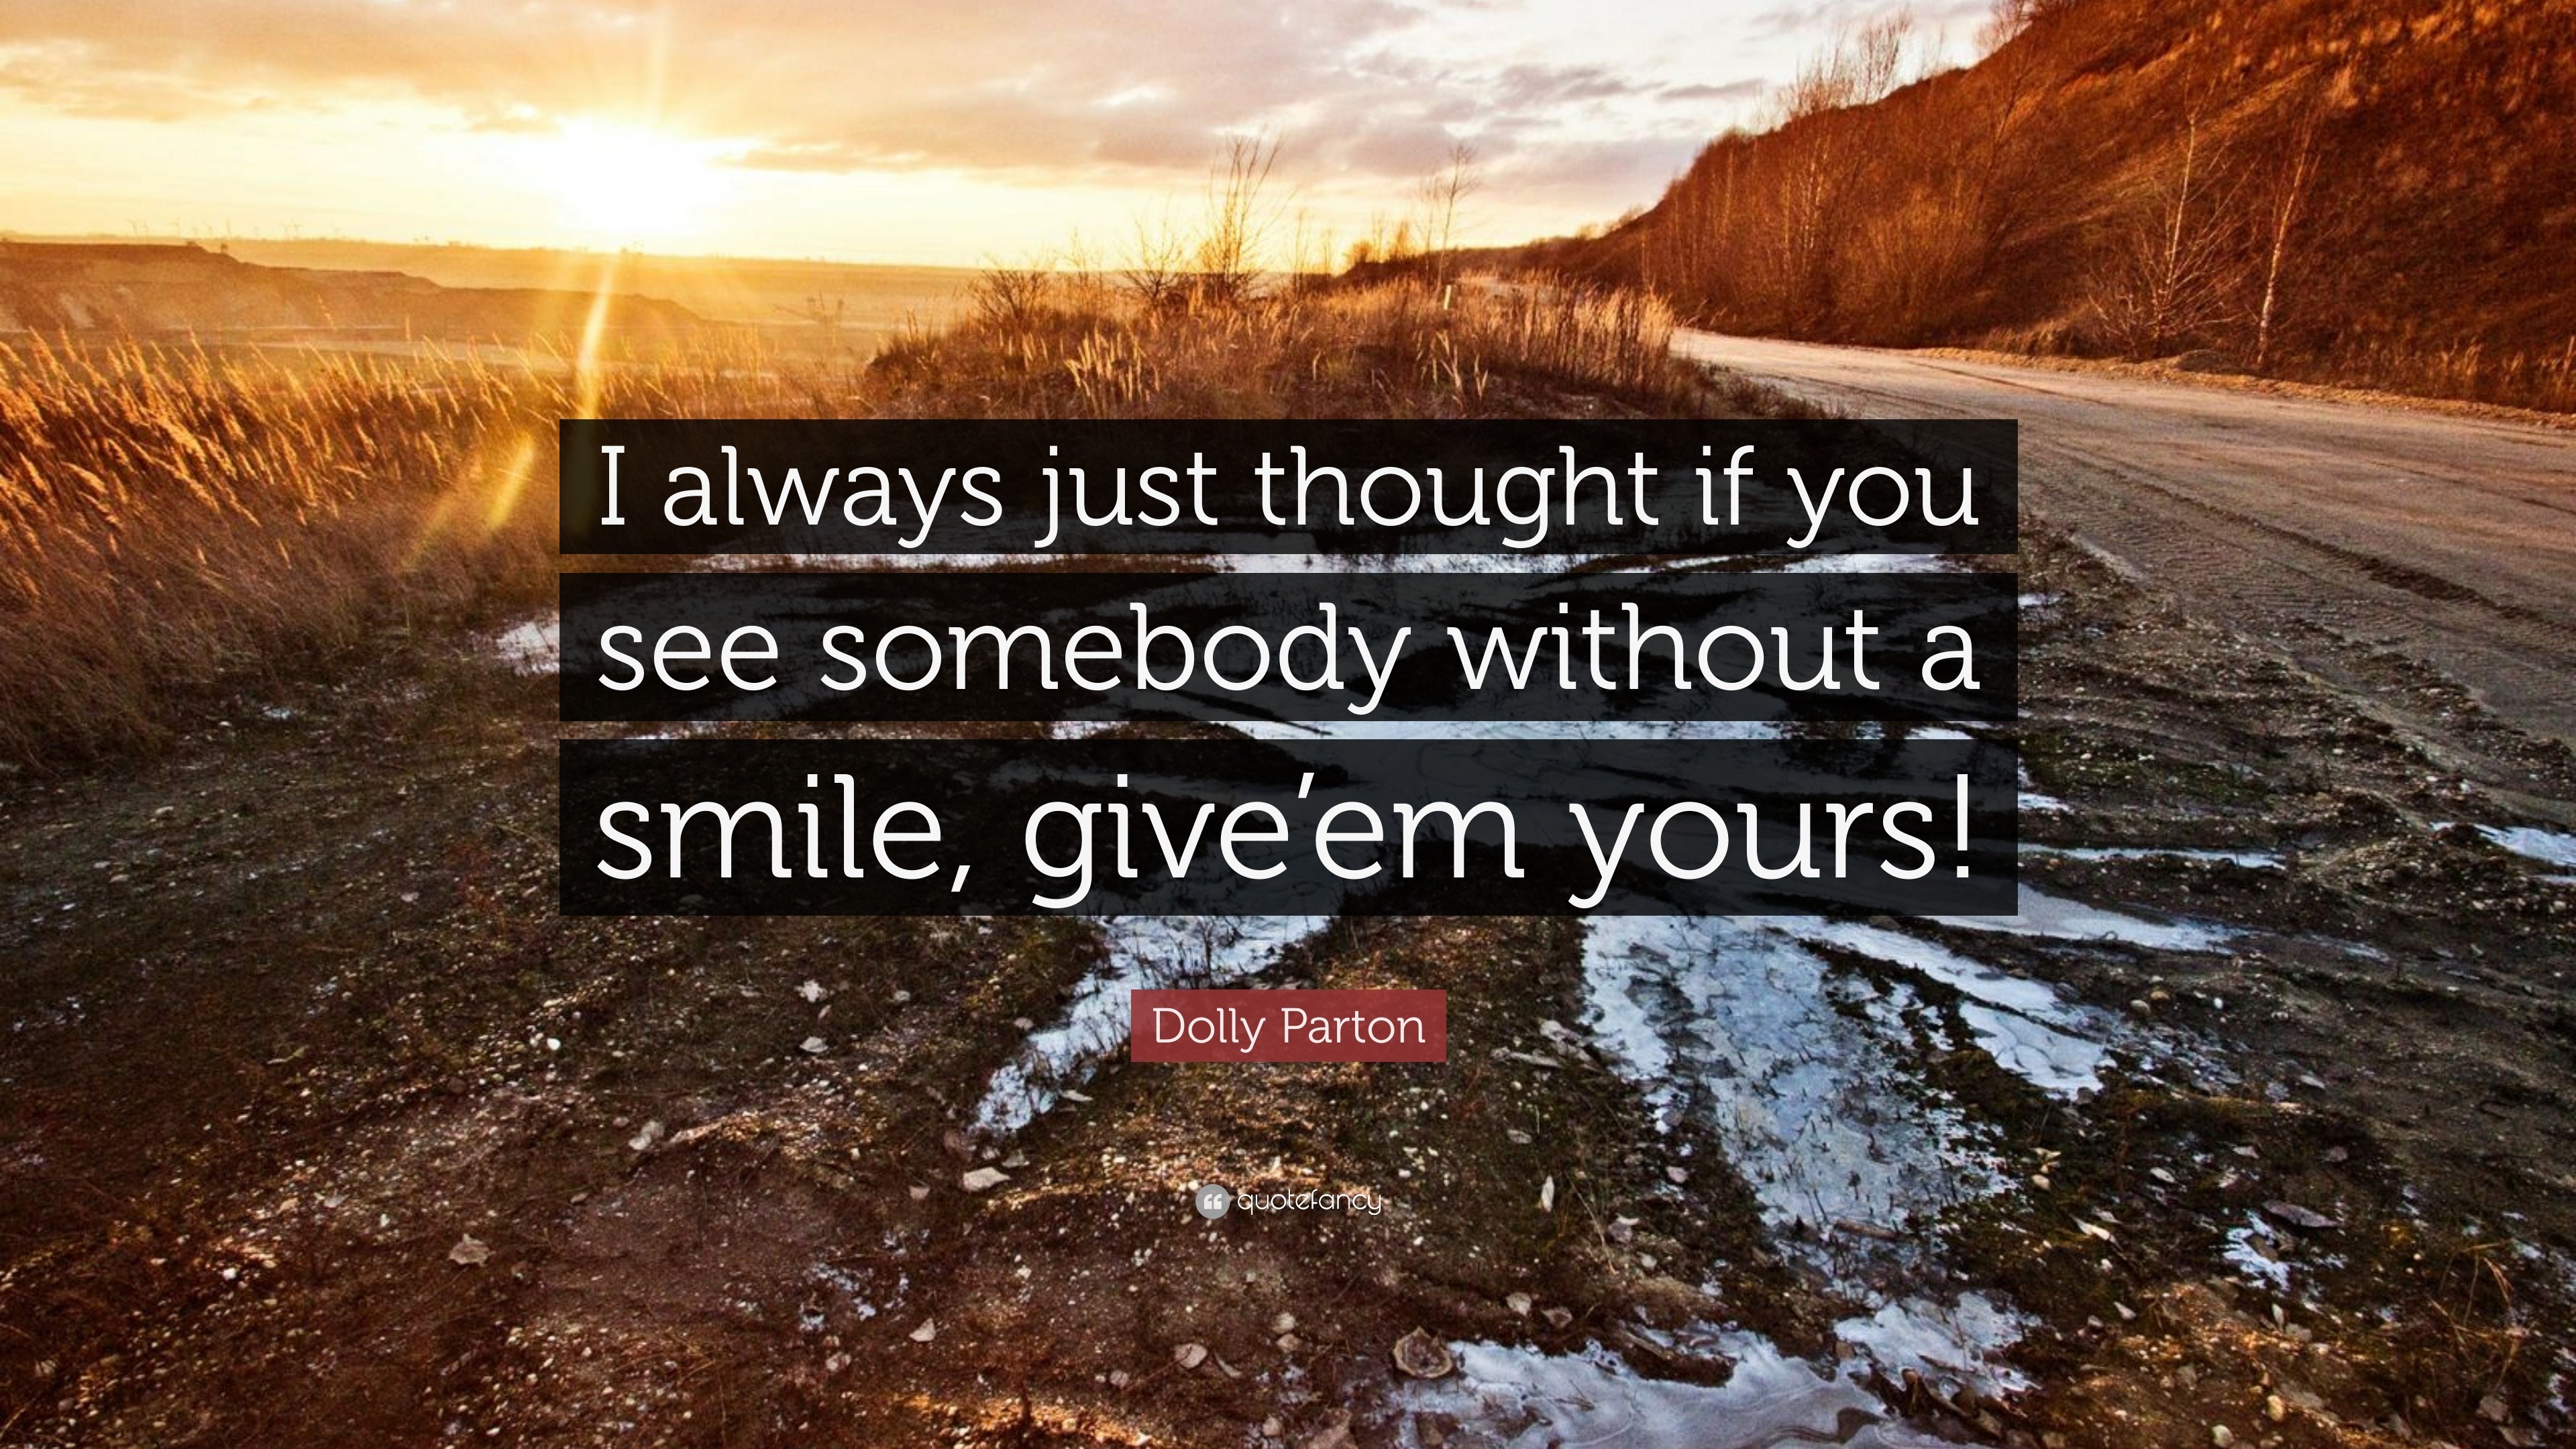 Dolly Parton Quote I Always Just Thought If You See Somebody Without A Smile Give Em